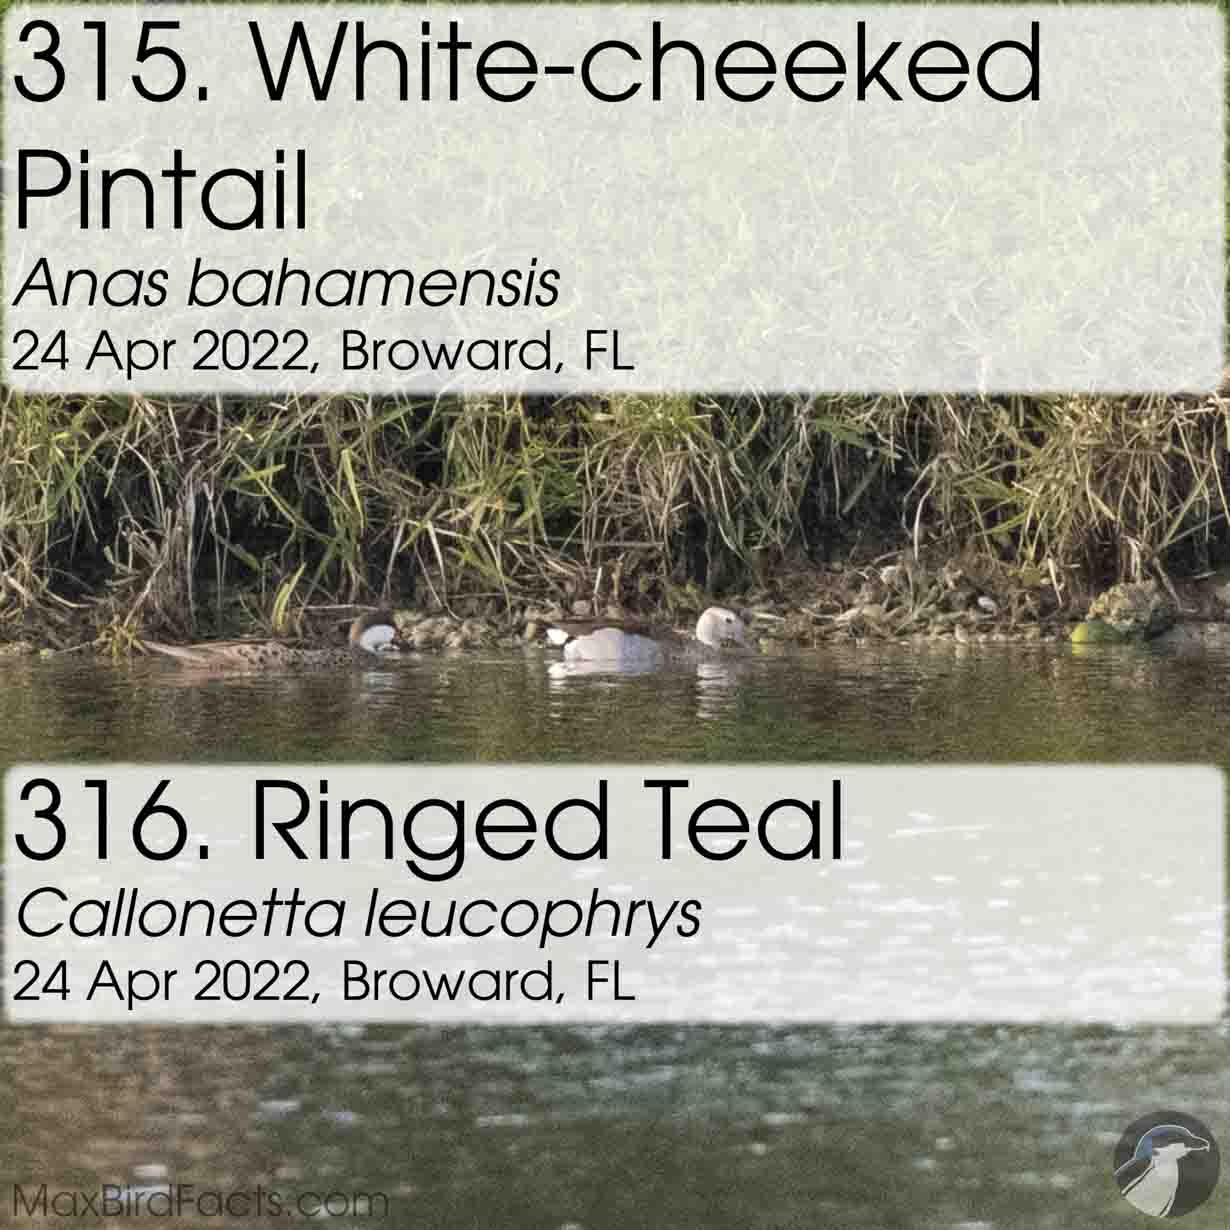 white cheeked pintail, ringed teal